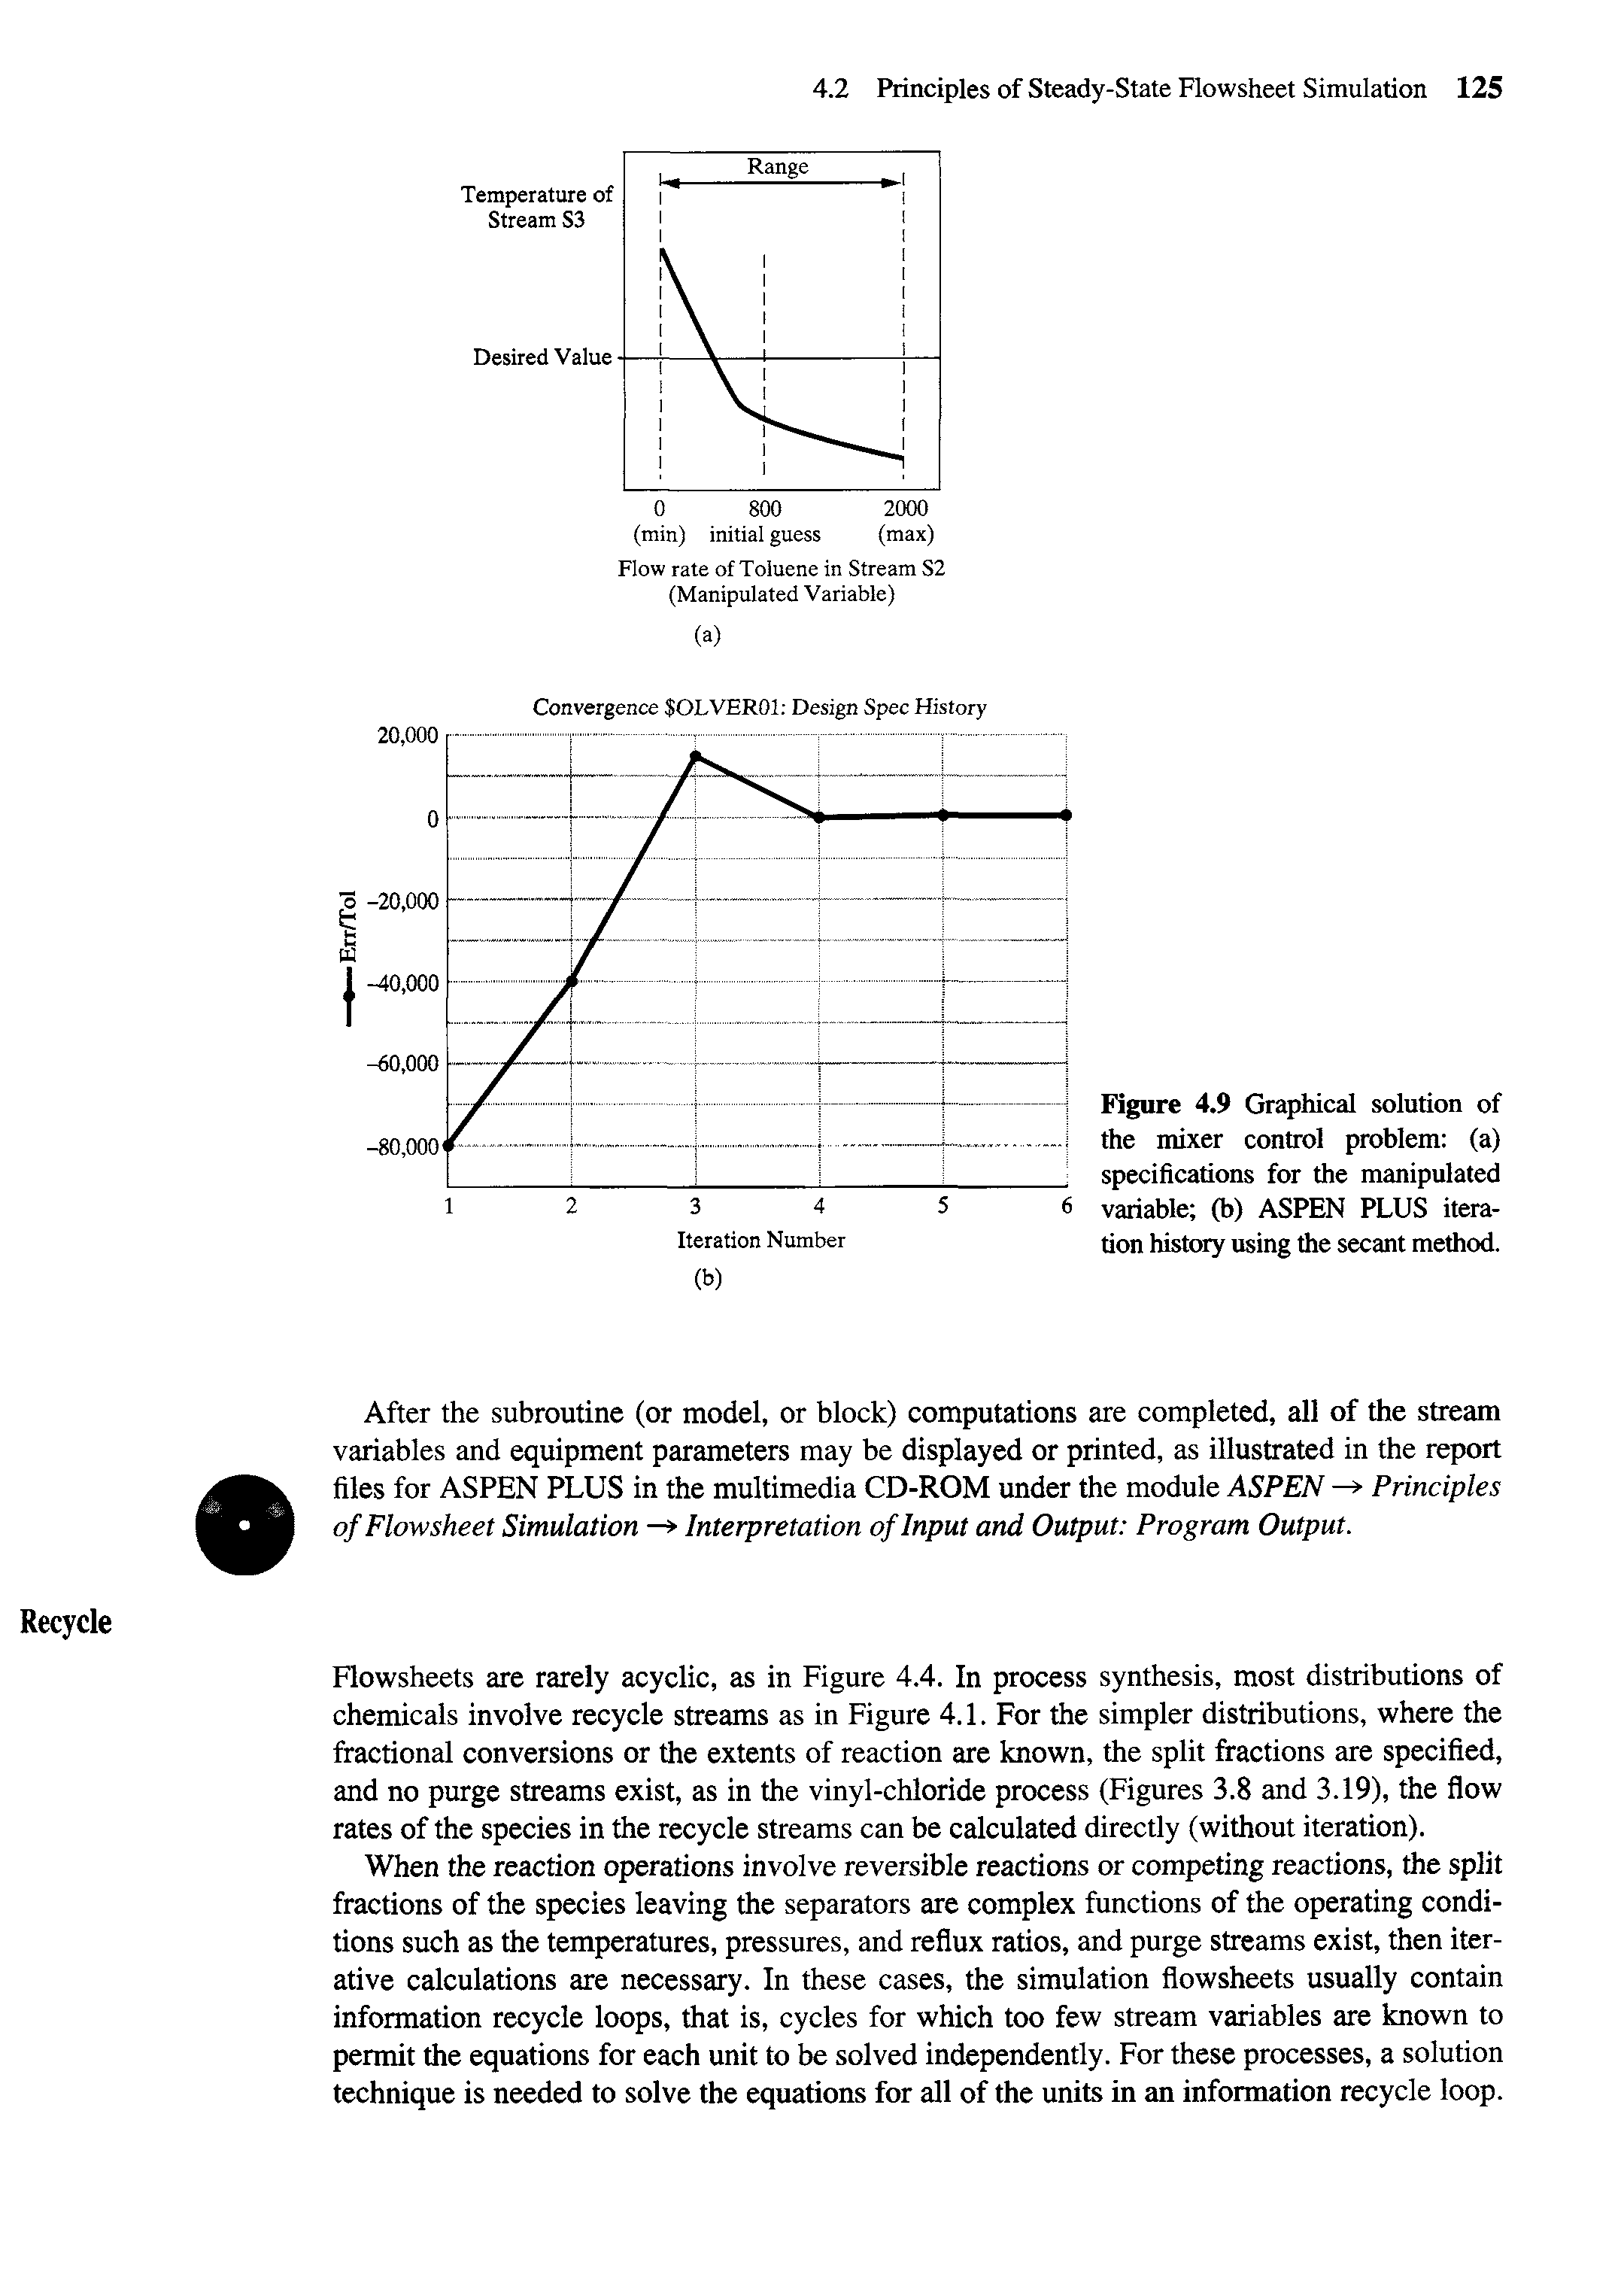 Figure 4.9 Graphical solution of the mixer control problem (a) specifications for the manipulated variable (b) ASPEN PLUS iteration history using the secant method.